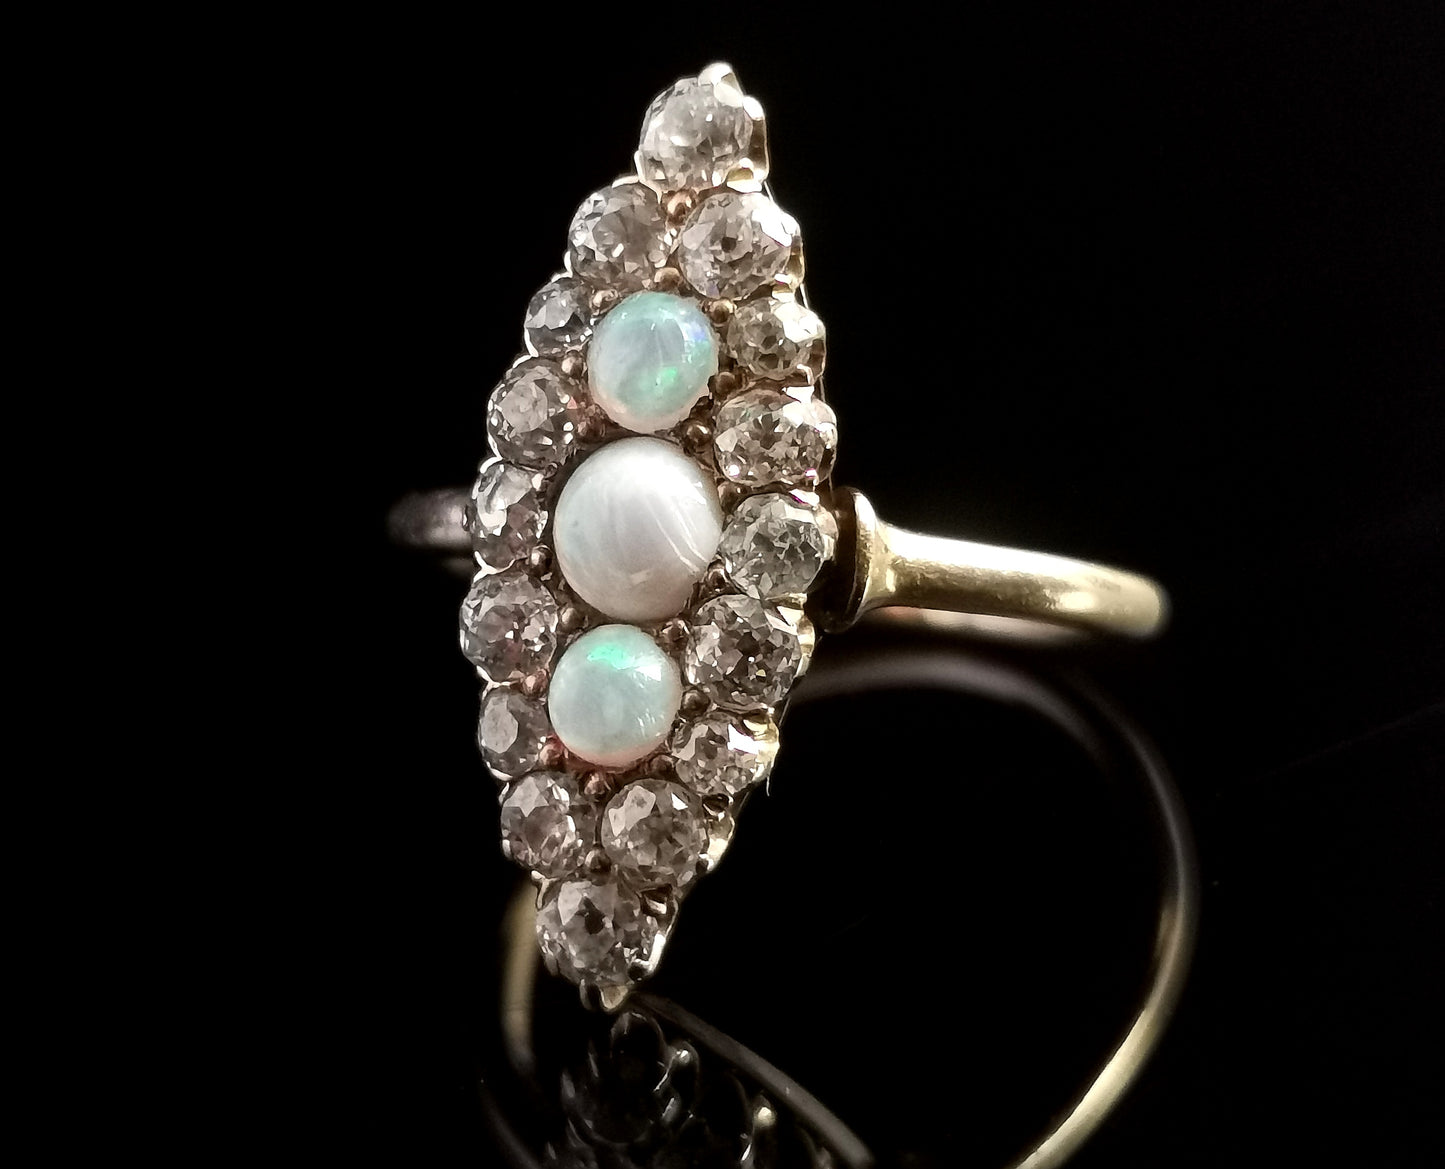 Antique Diamond and Opal navette ring, 18ct gold, Edwardian